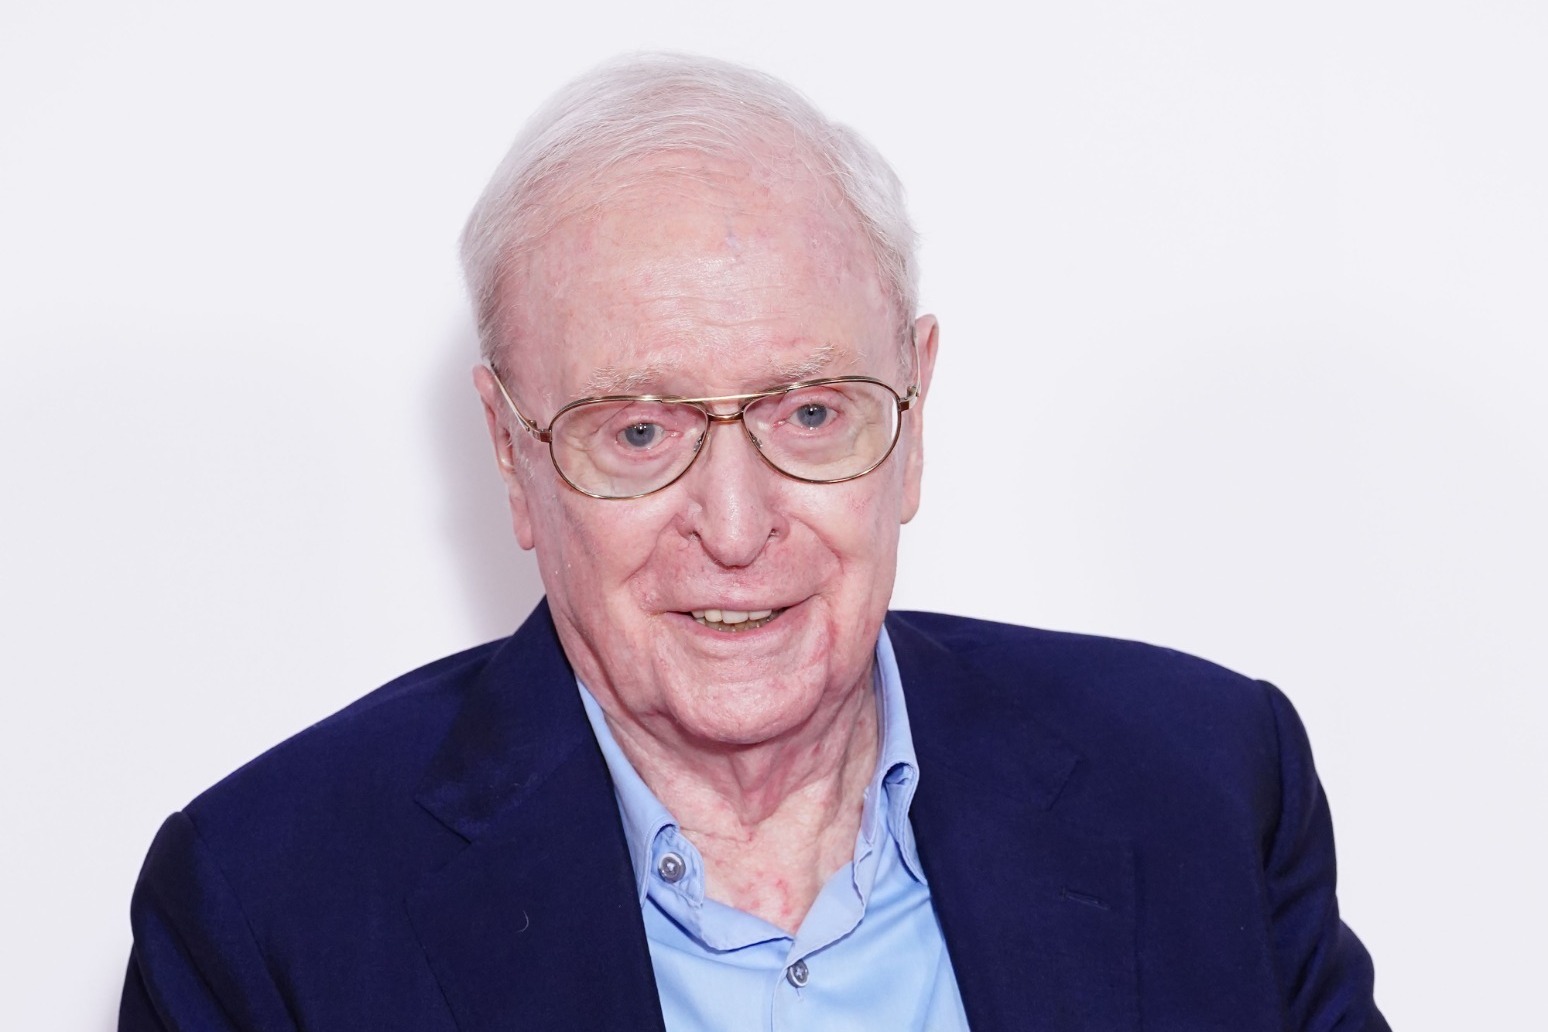 Sir Michael Caine confirms his retirement from acting 